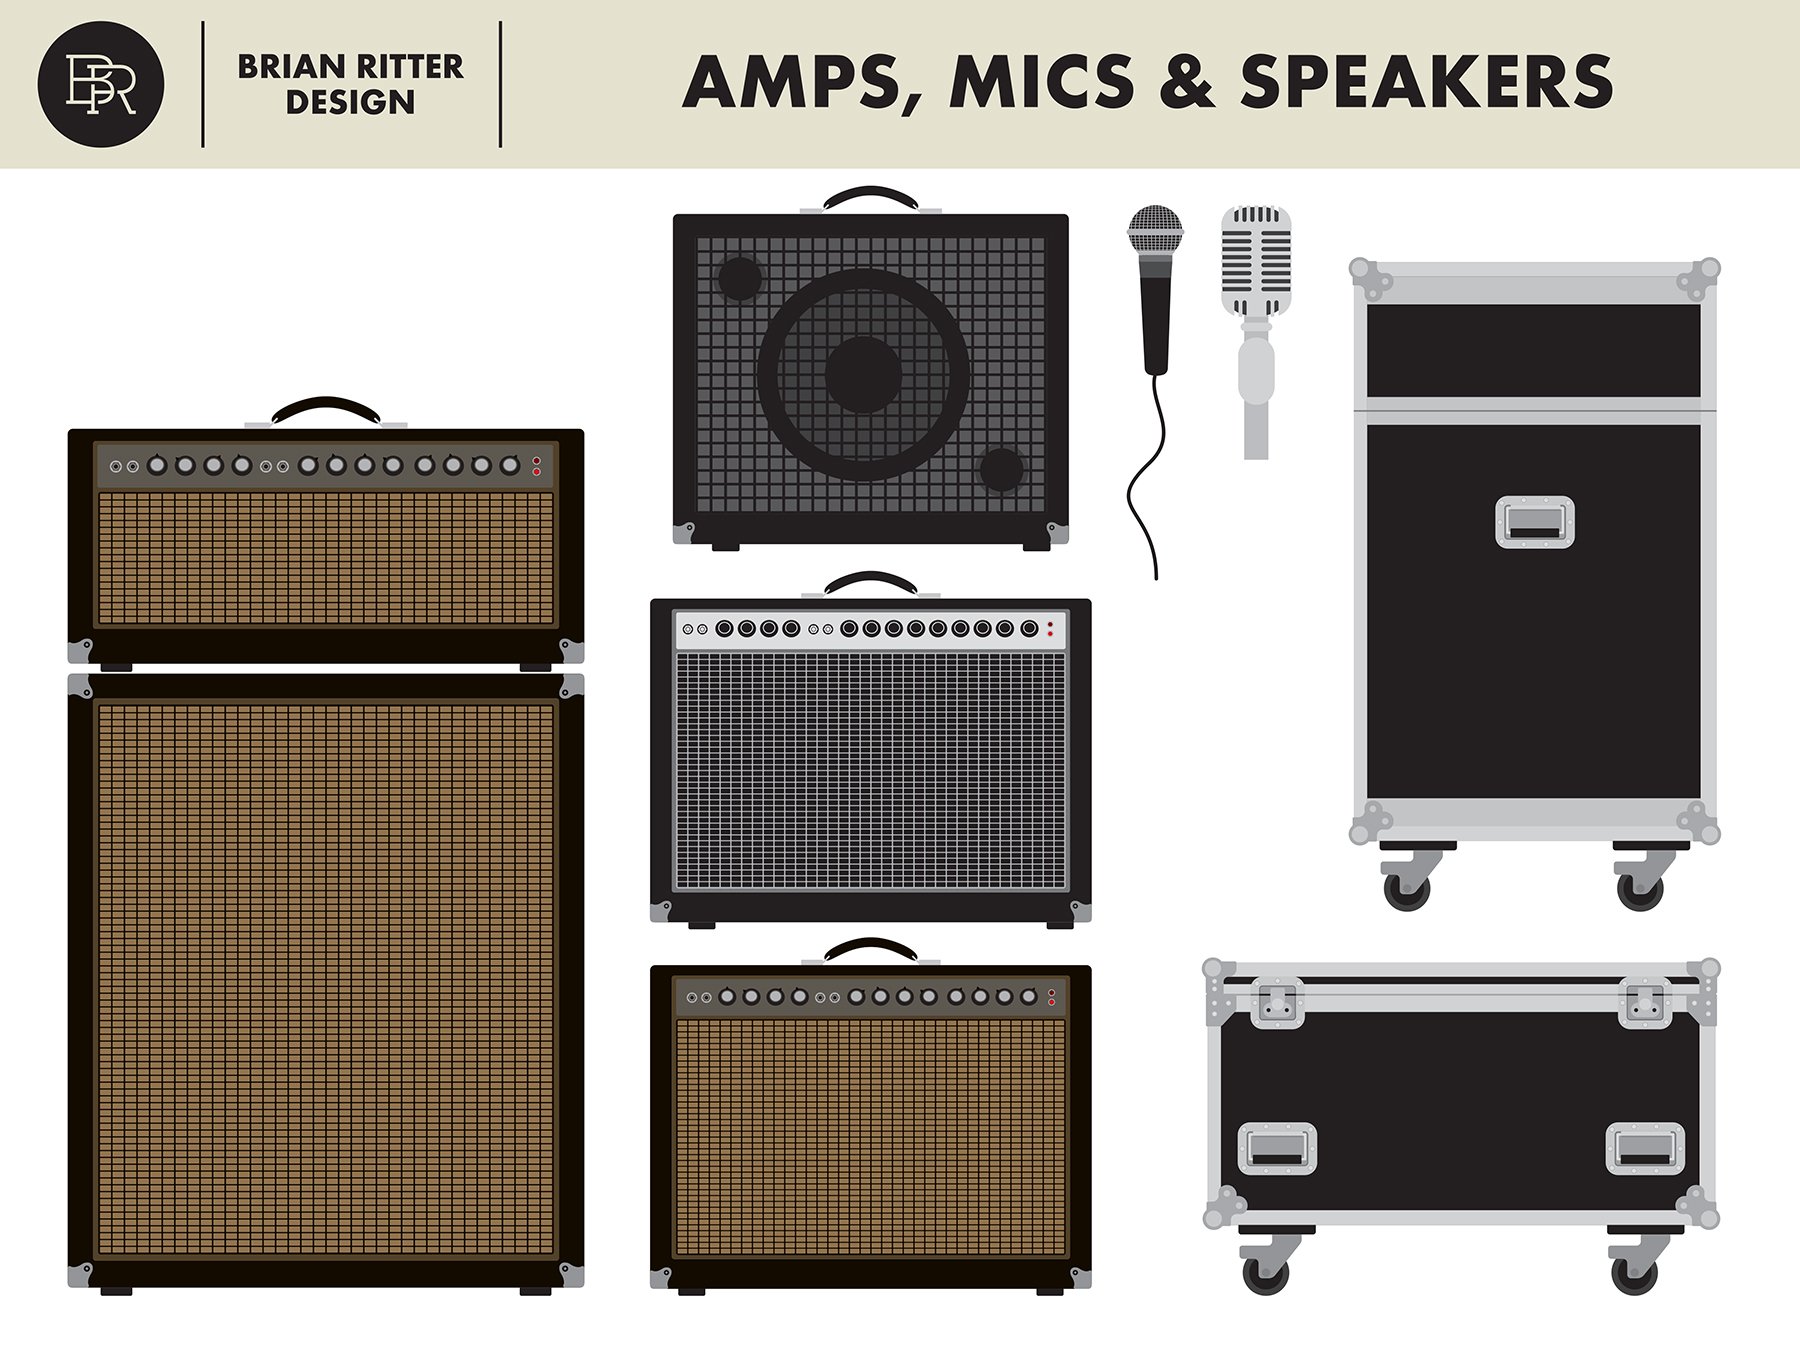 Amps, mics and speakers.